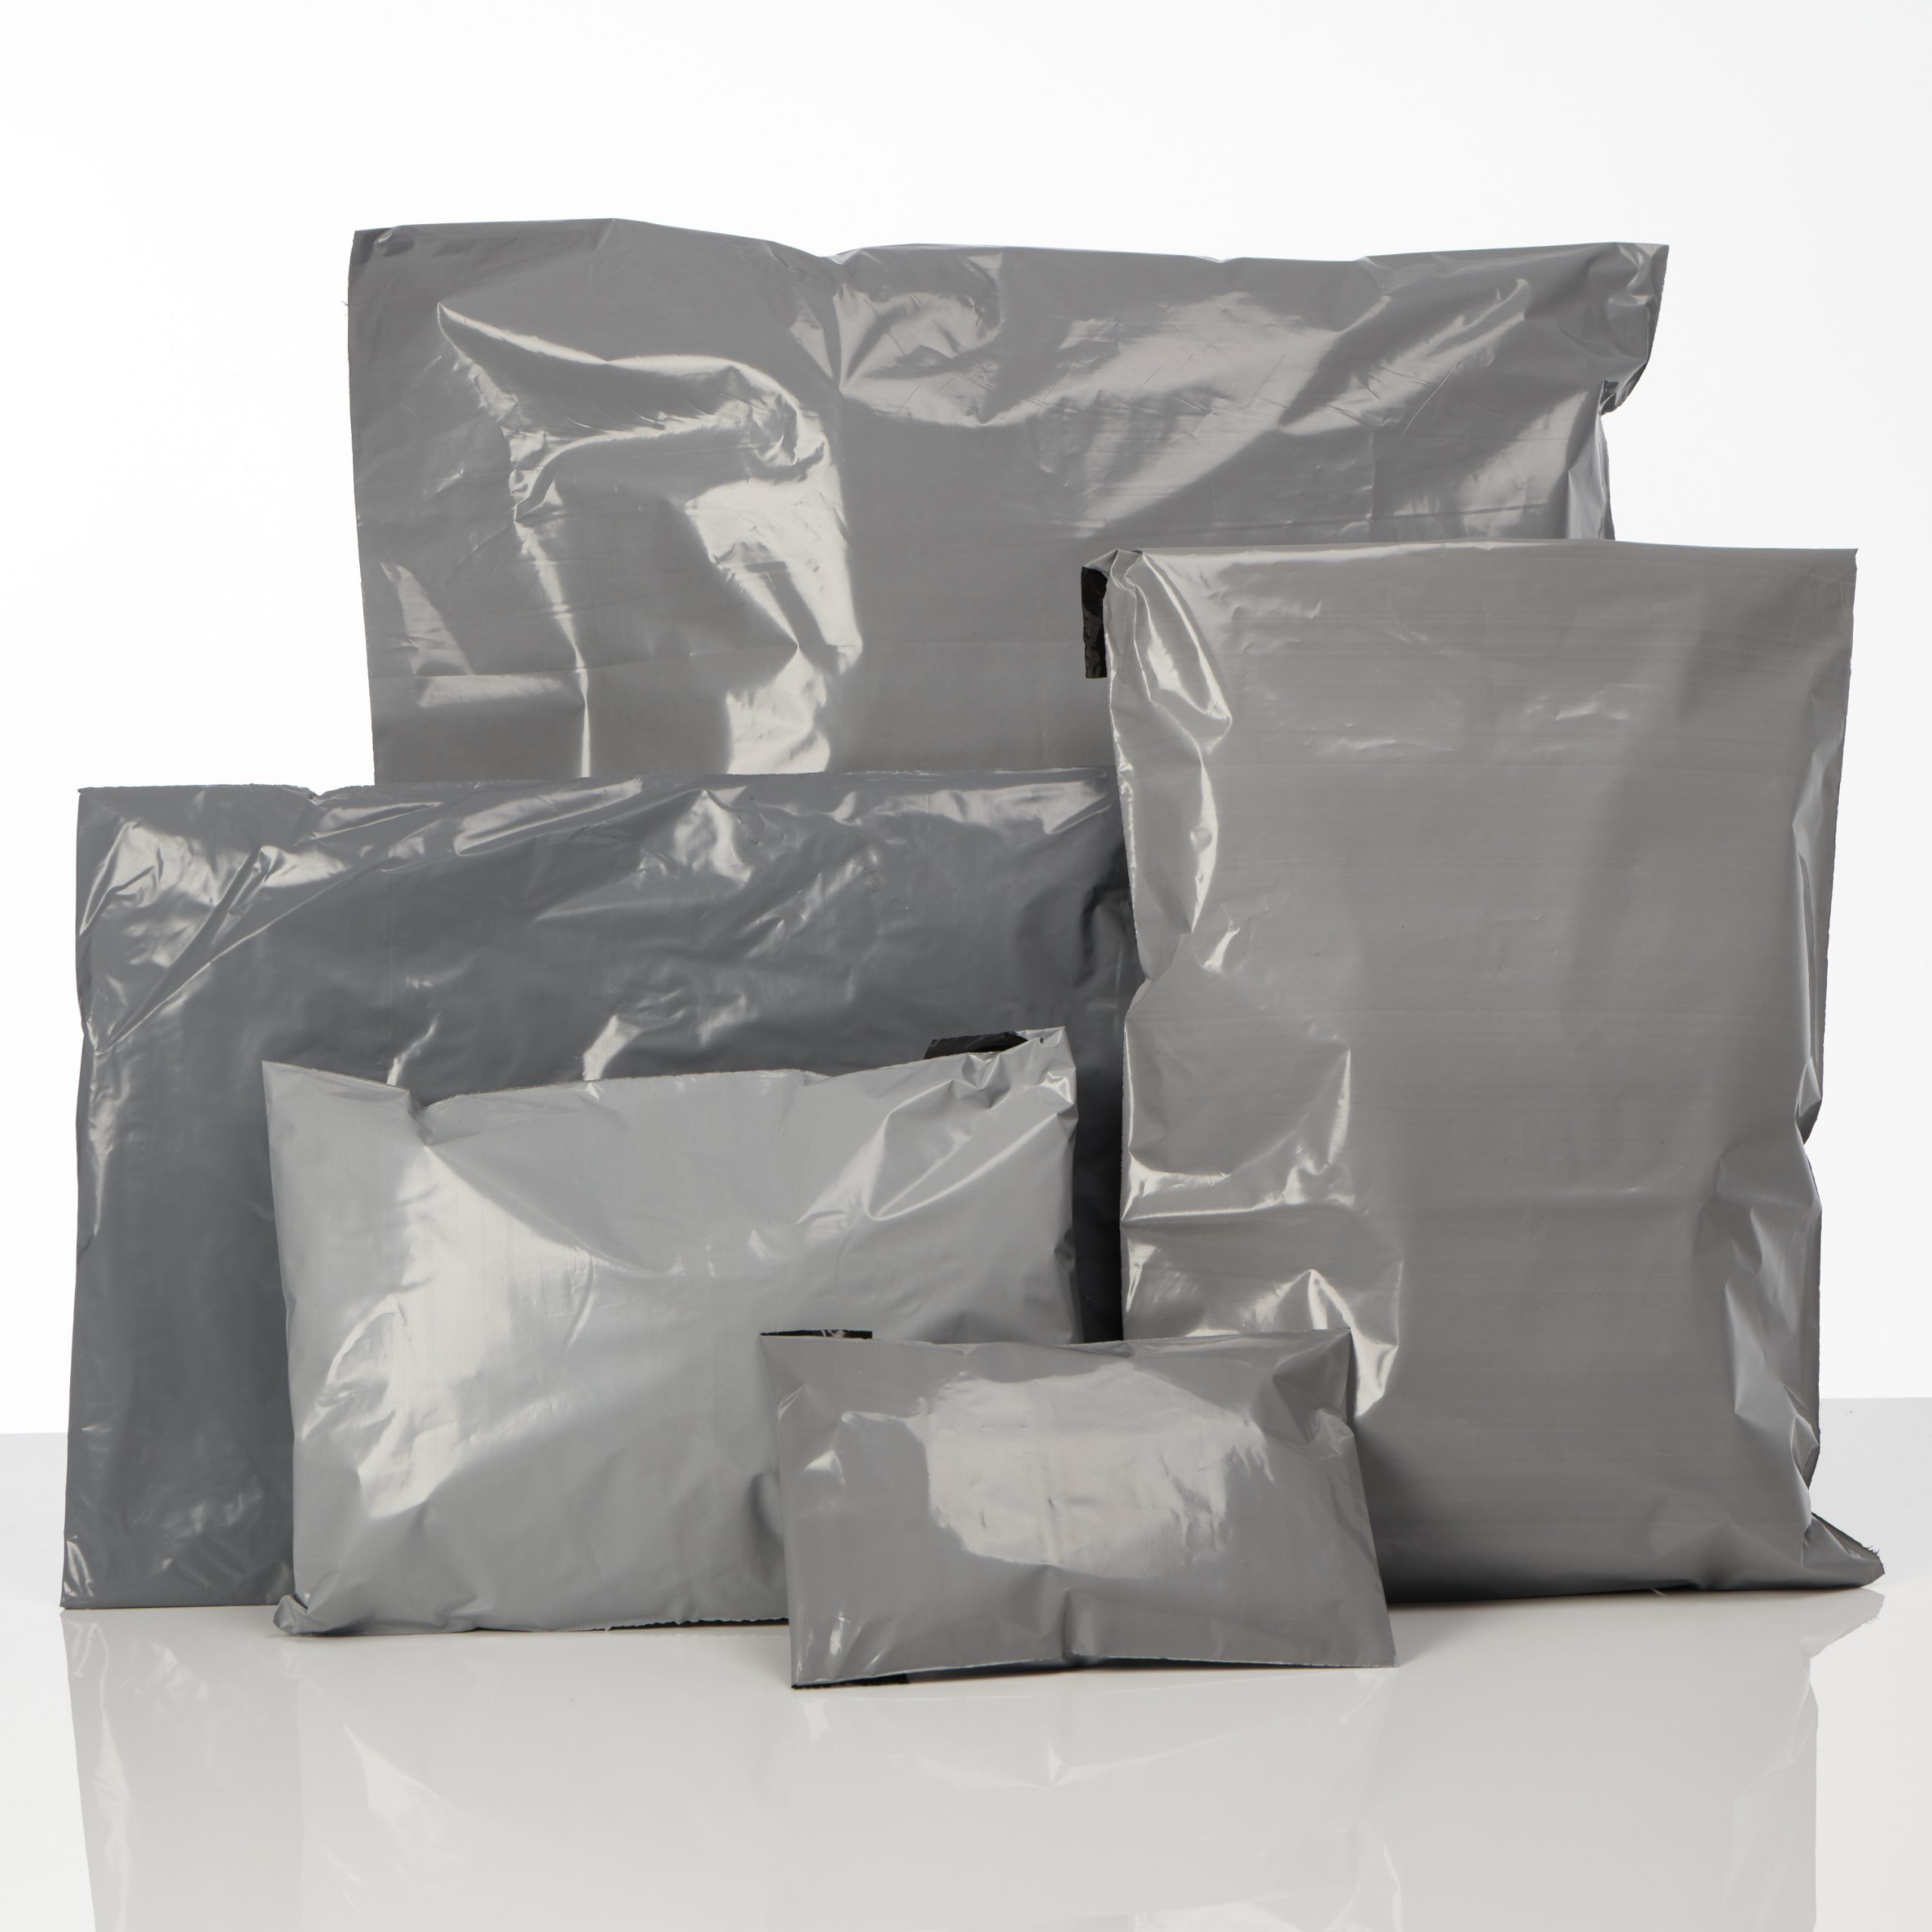 Details about   UK Strong Plastic Packaging Post Polythene Postage Mailing Bag Self Seal 